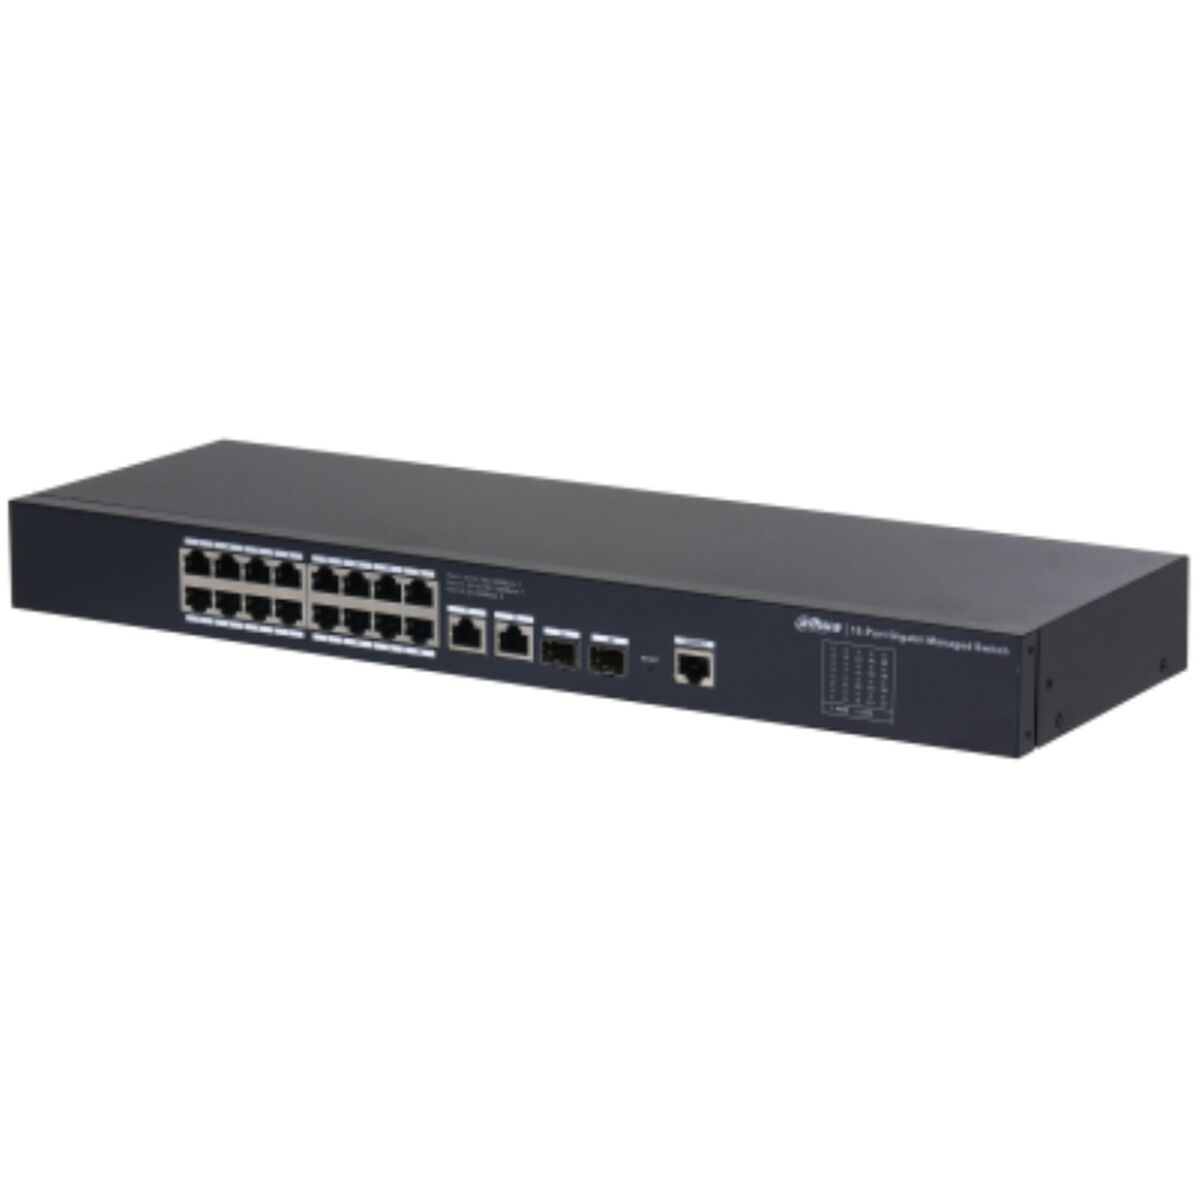 Switch DAHUA TECHNOLOGY DH-SG4020, DAHUA TECHNOLOGY, Computing, Network devices, switch-dahua-technology-dh-sg4020, Brand_DAHUA TECHNOLOGY, category-reference-2609, category-reference-2803, category-reference-2827, category-reference-t-19685, category-reference-t-19914, category-reference-t-21367, Condition_NEW, networks/wiring, Price_100 - 200, Teleworking, RiotNook